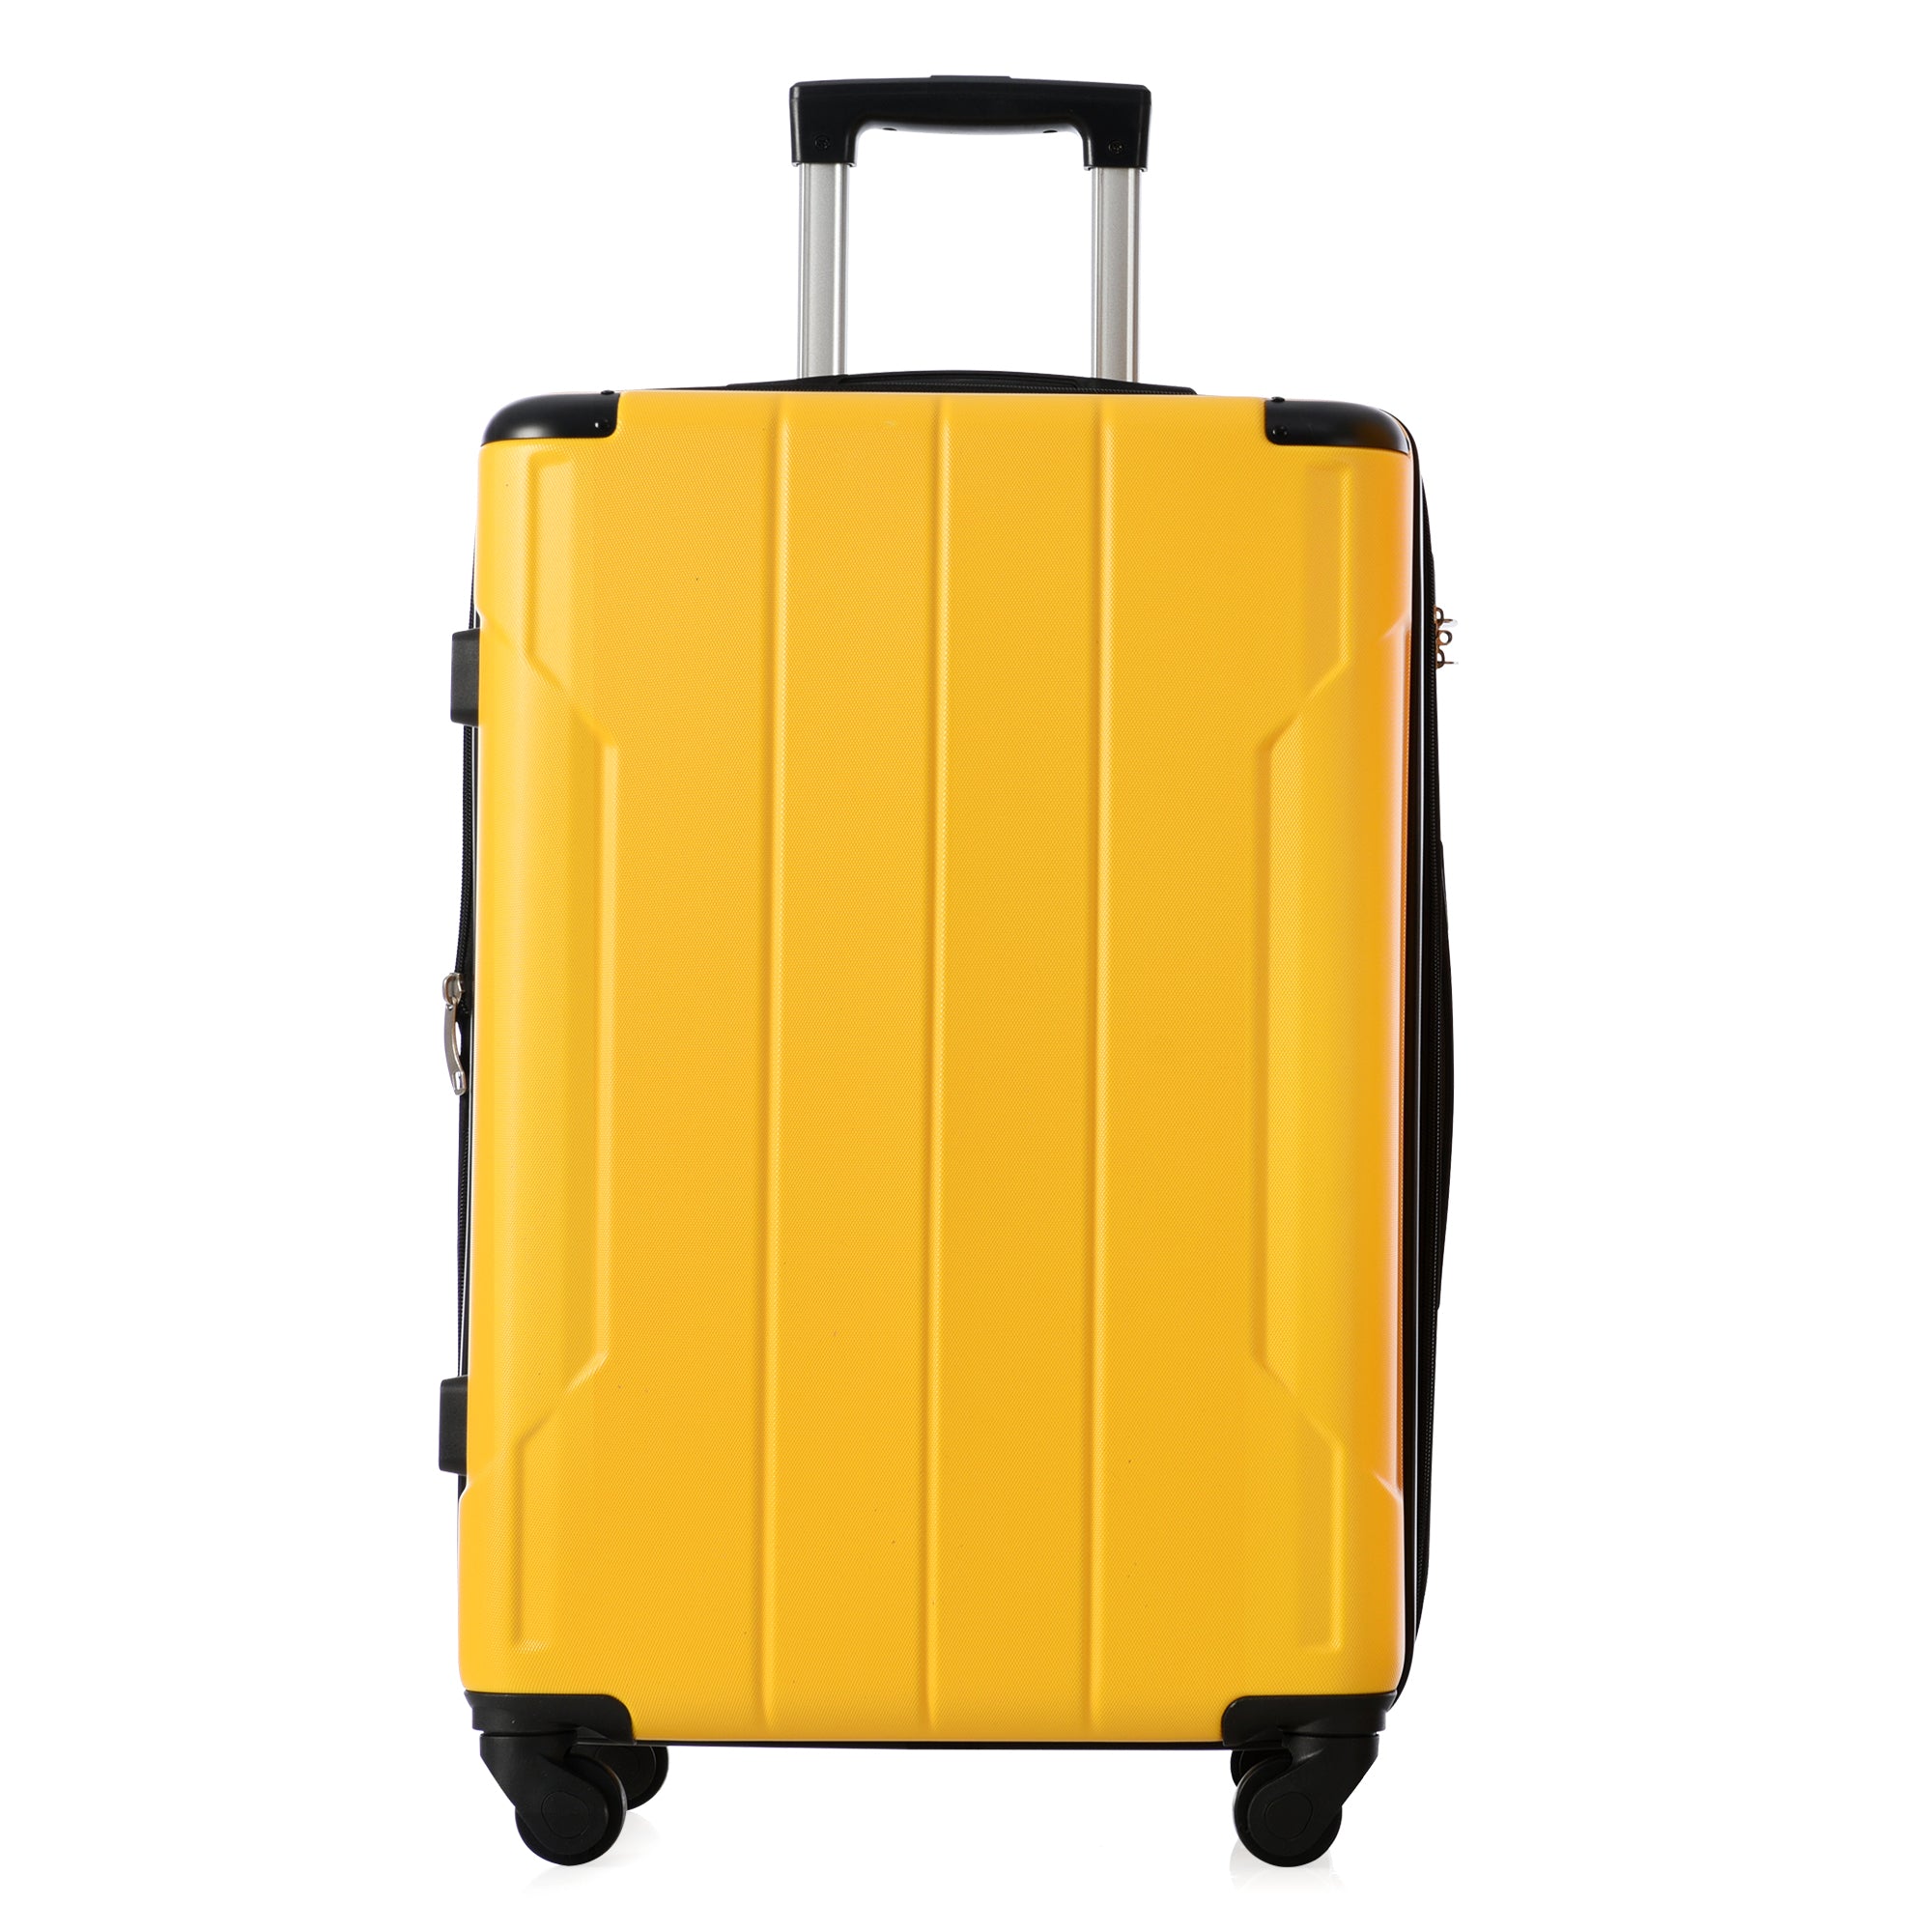 Suitcase Set 3 Piece Luggage Set Carry On Hardside yellow-abs